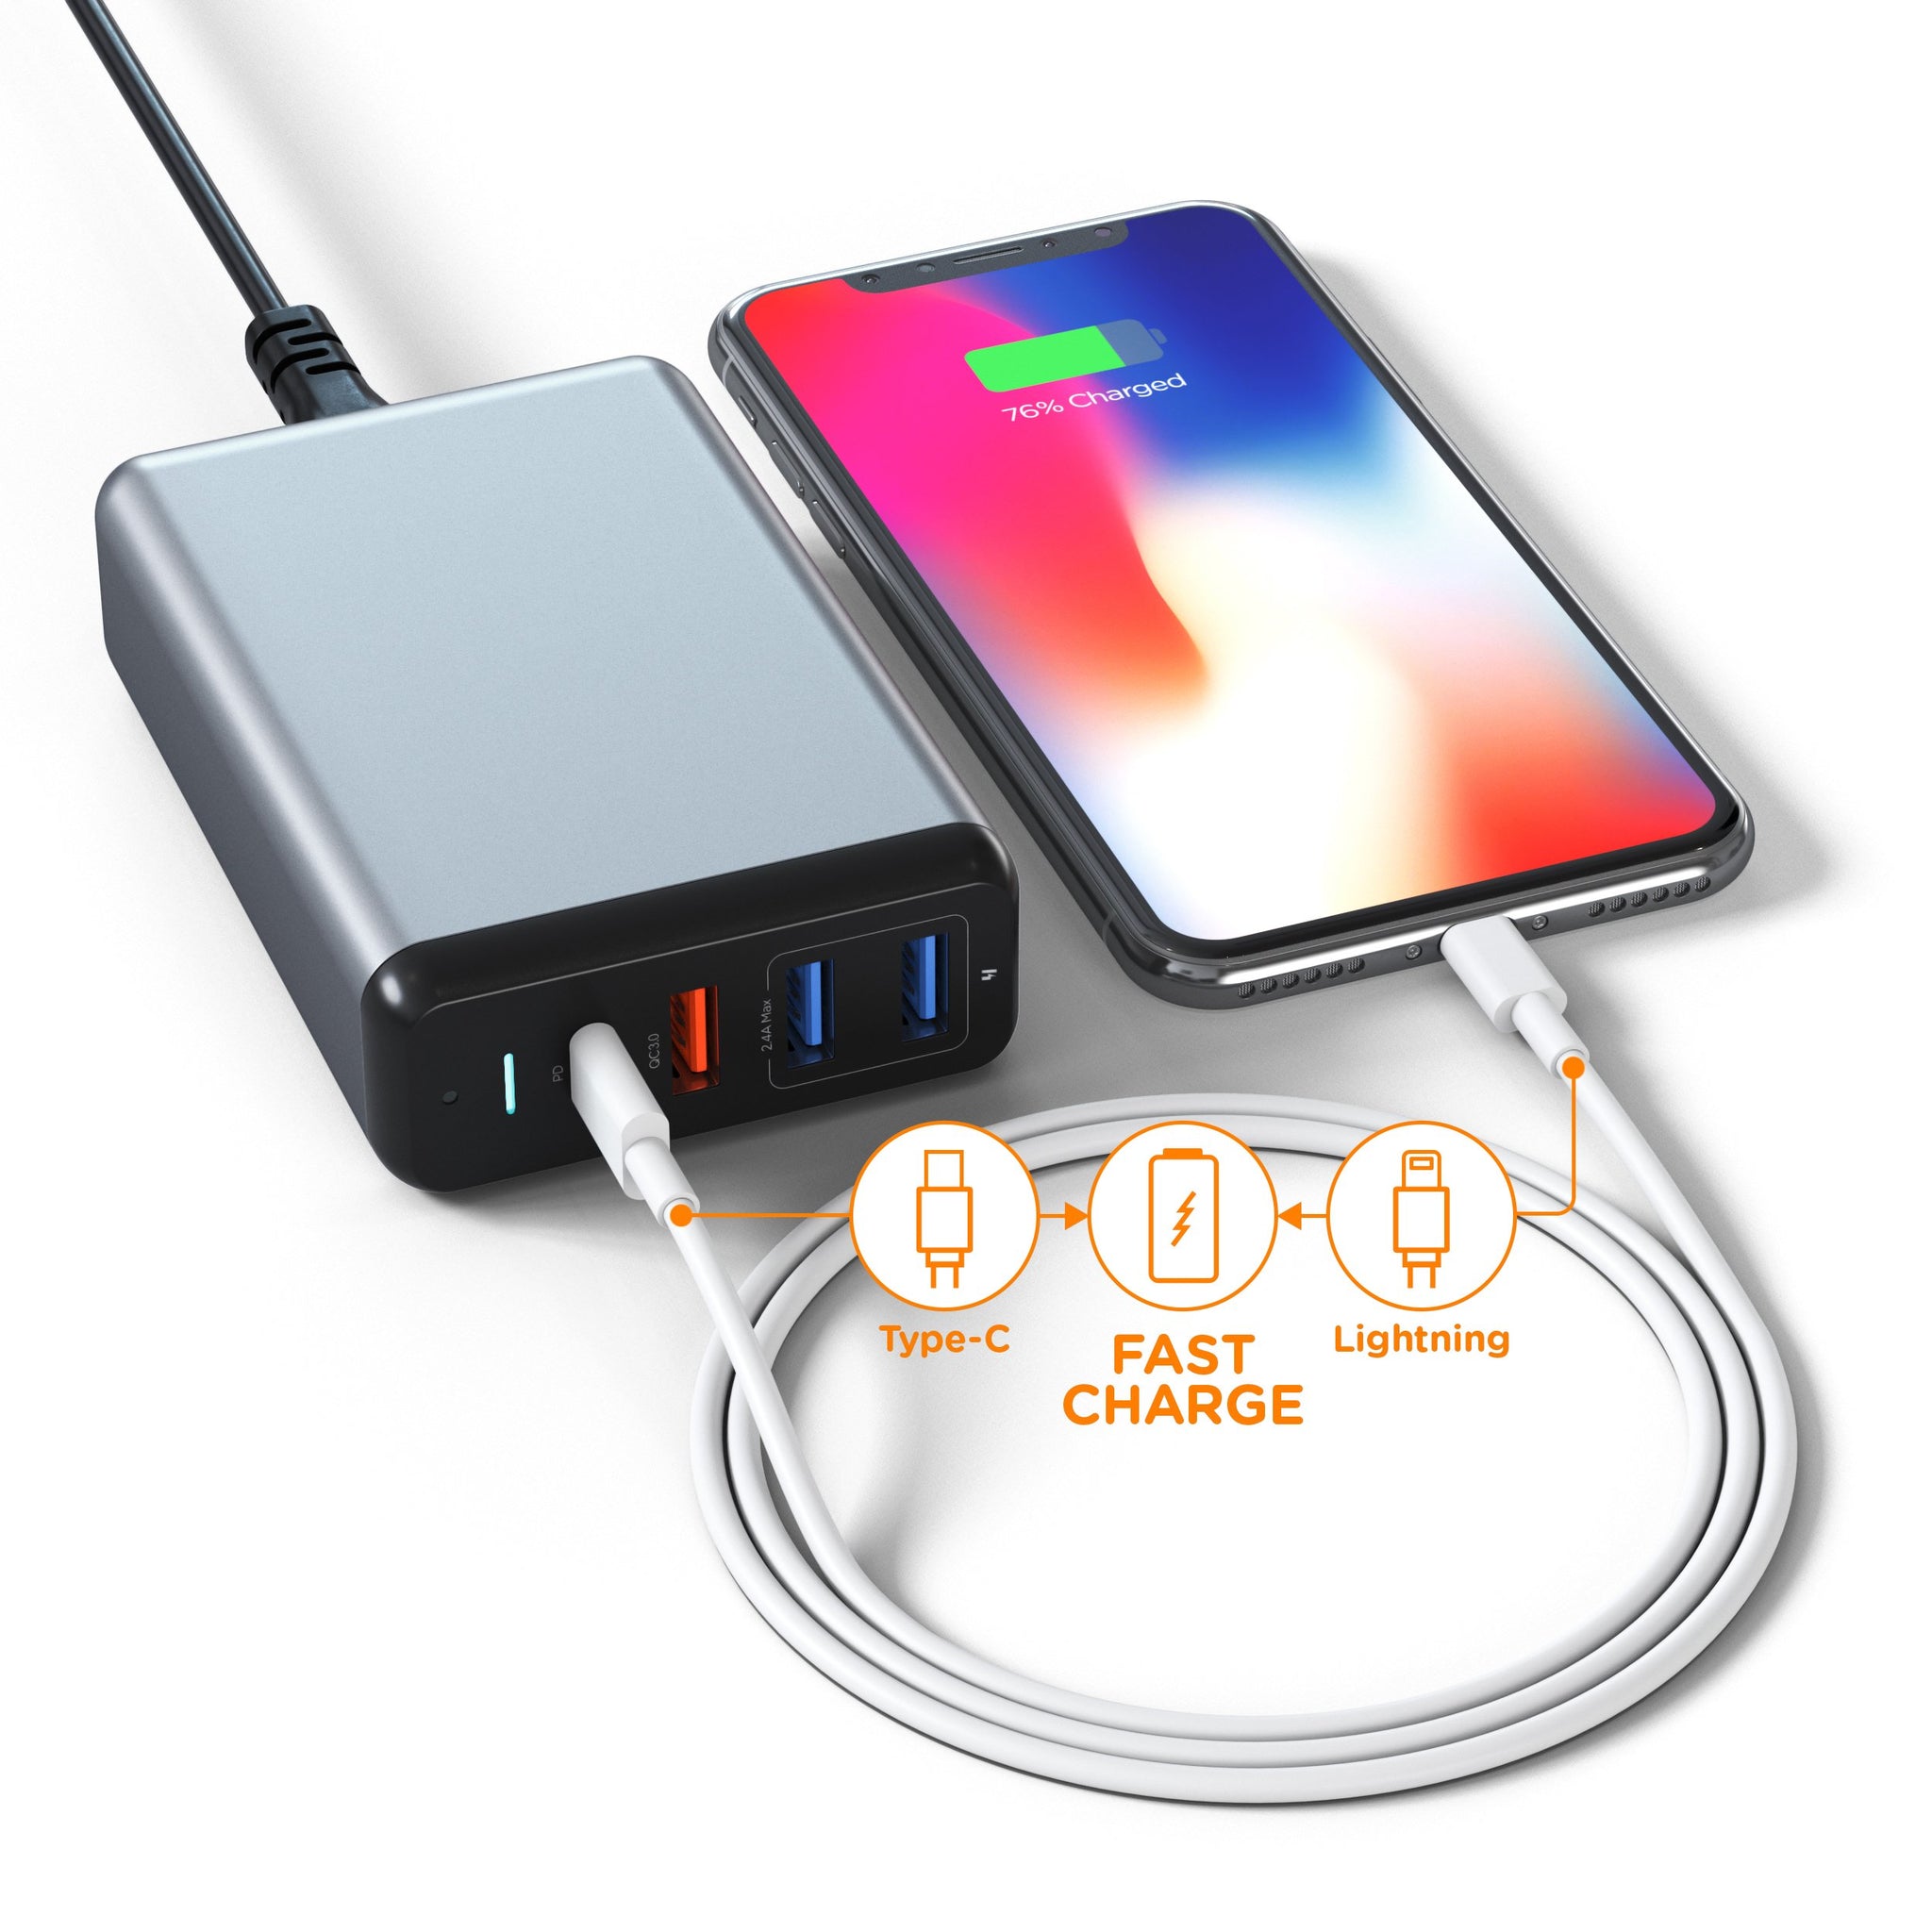 mild Kejser lysere New Type-C 75W Travel Charger Available Now